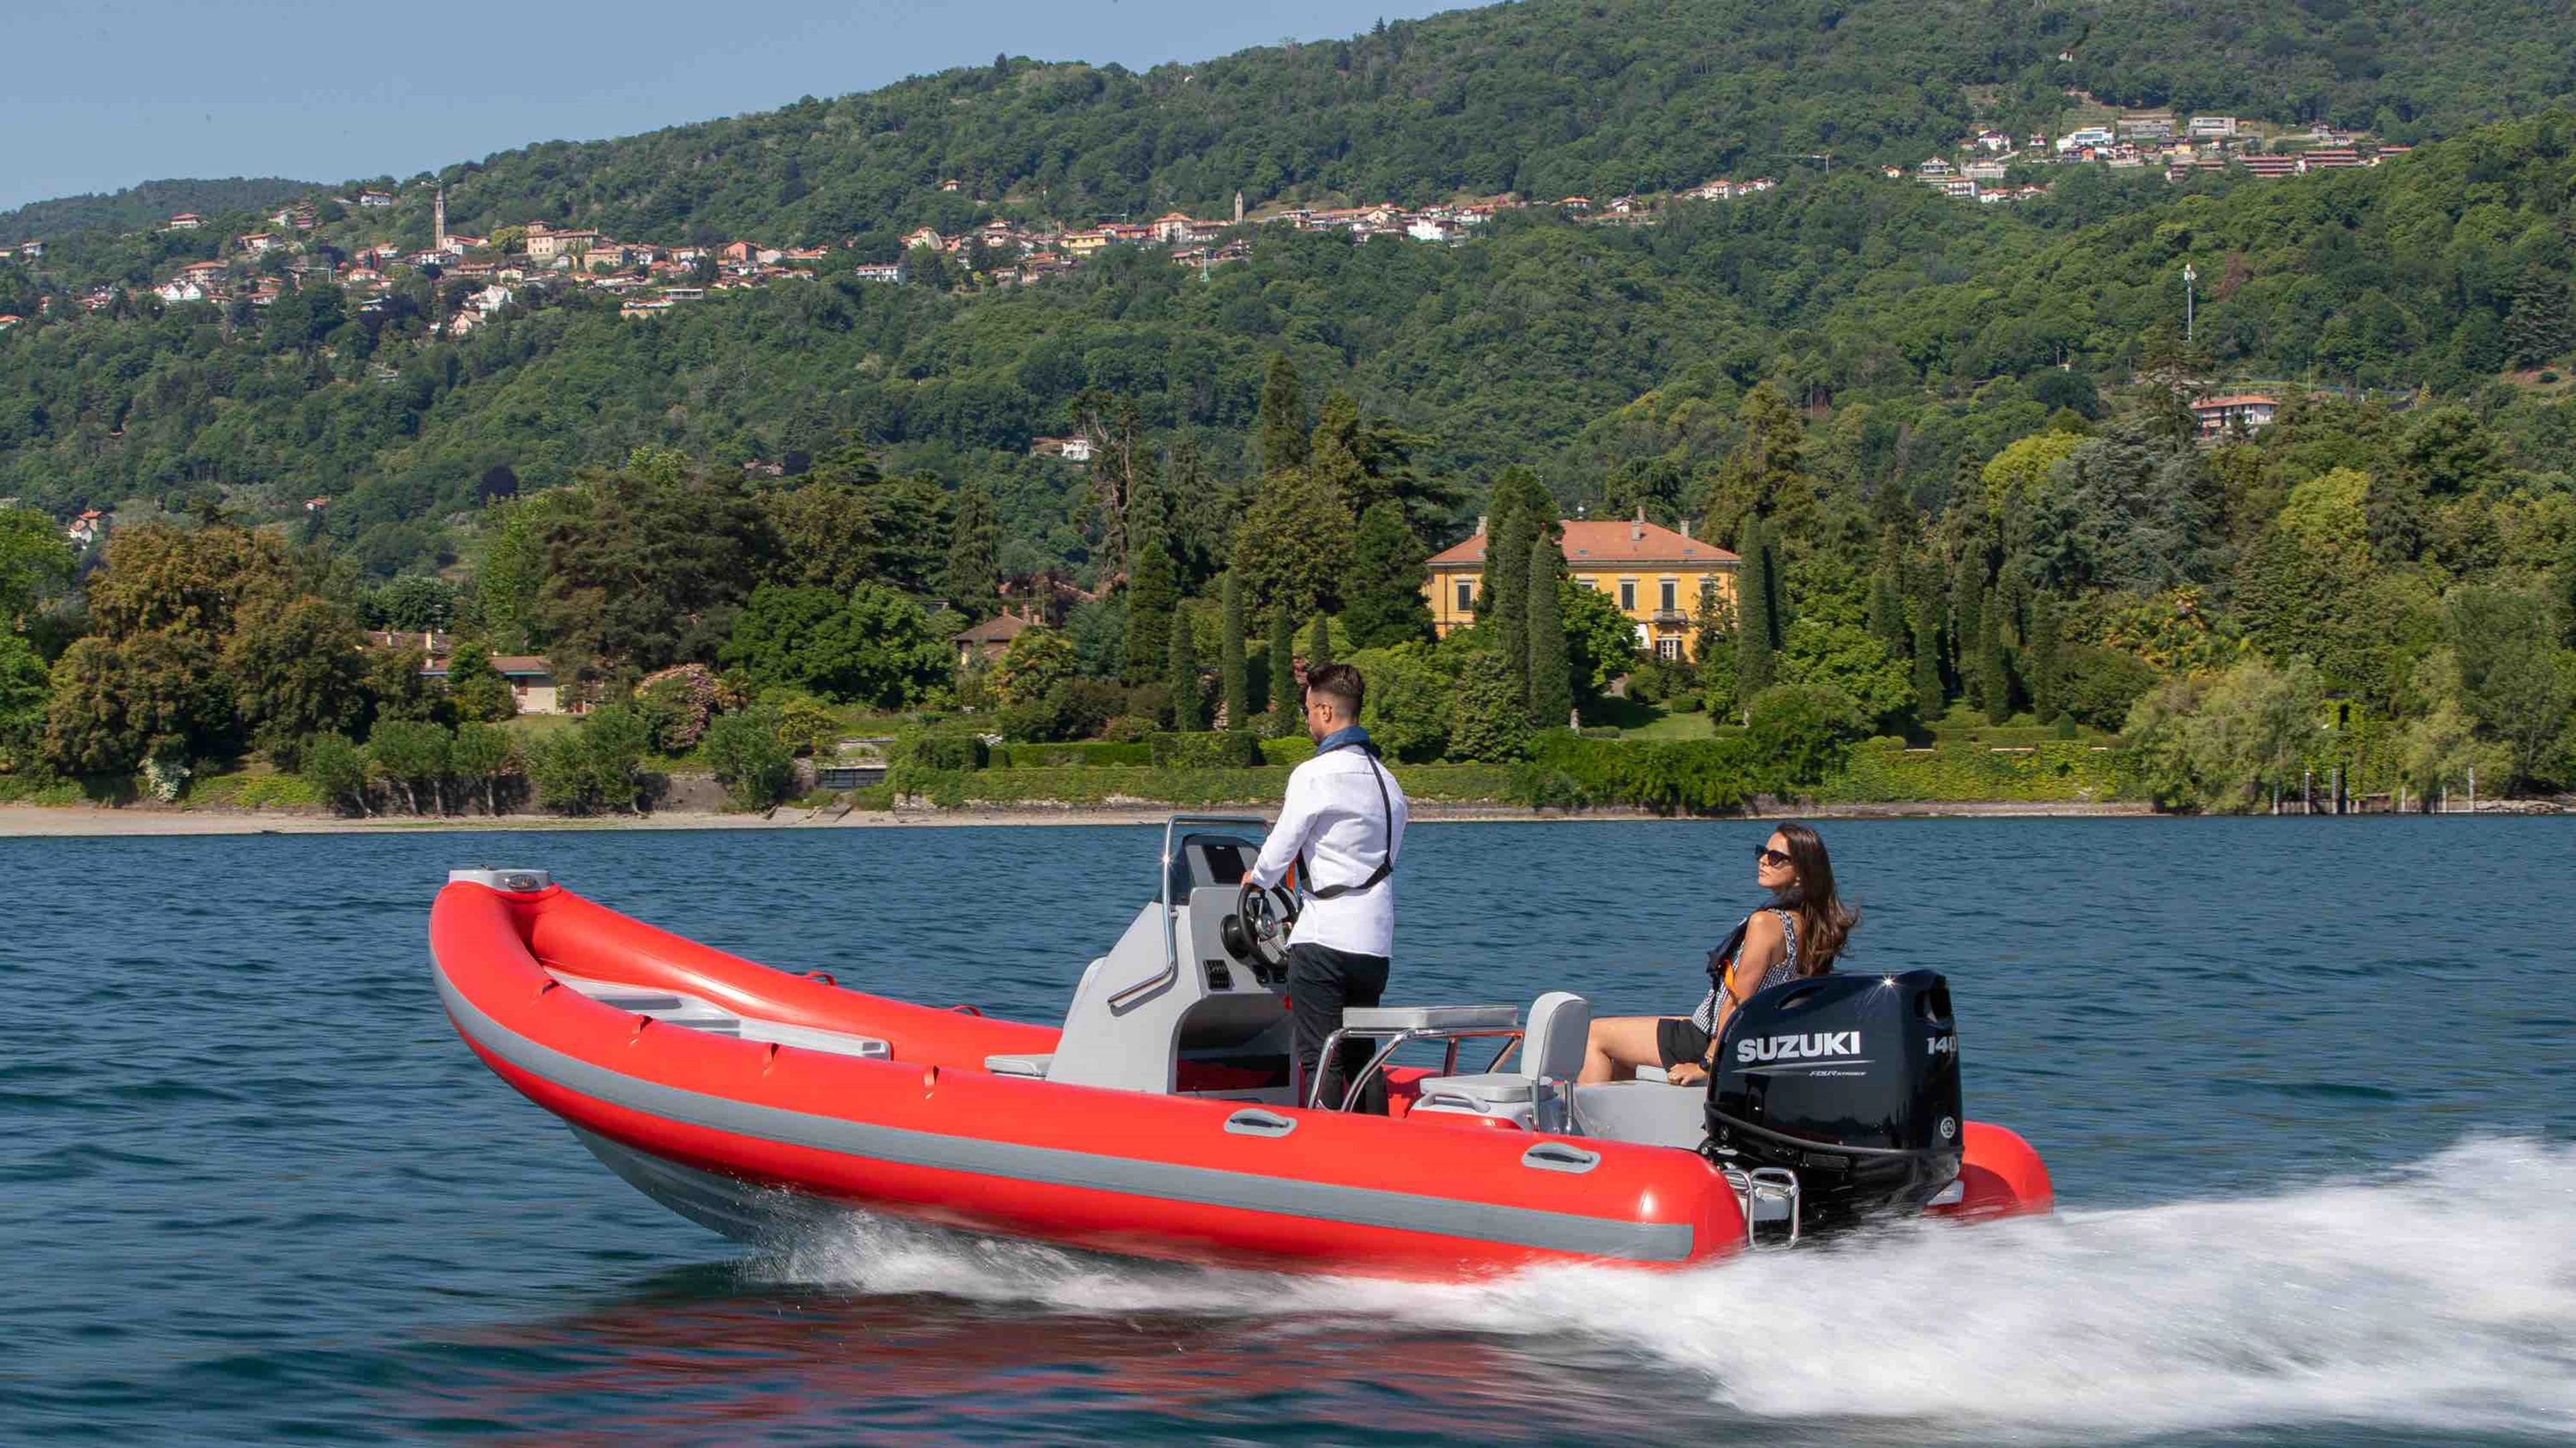 Driving a RIB on a lake with passenger